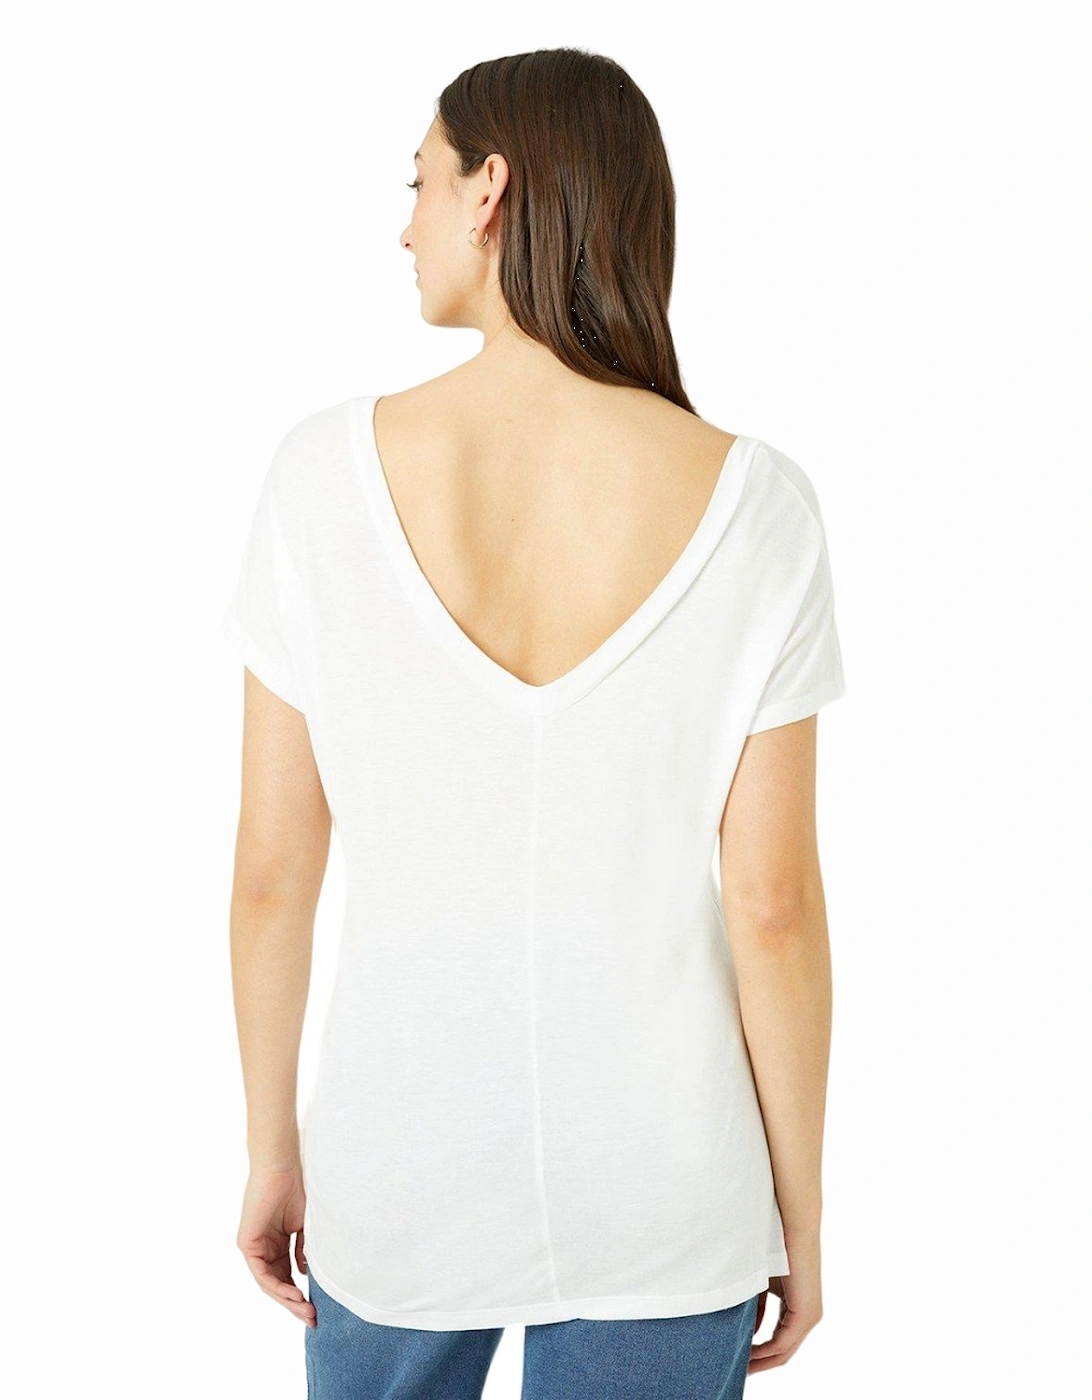 Womens/Ladies Slouch T-Shirt